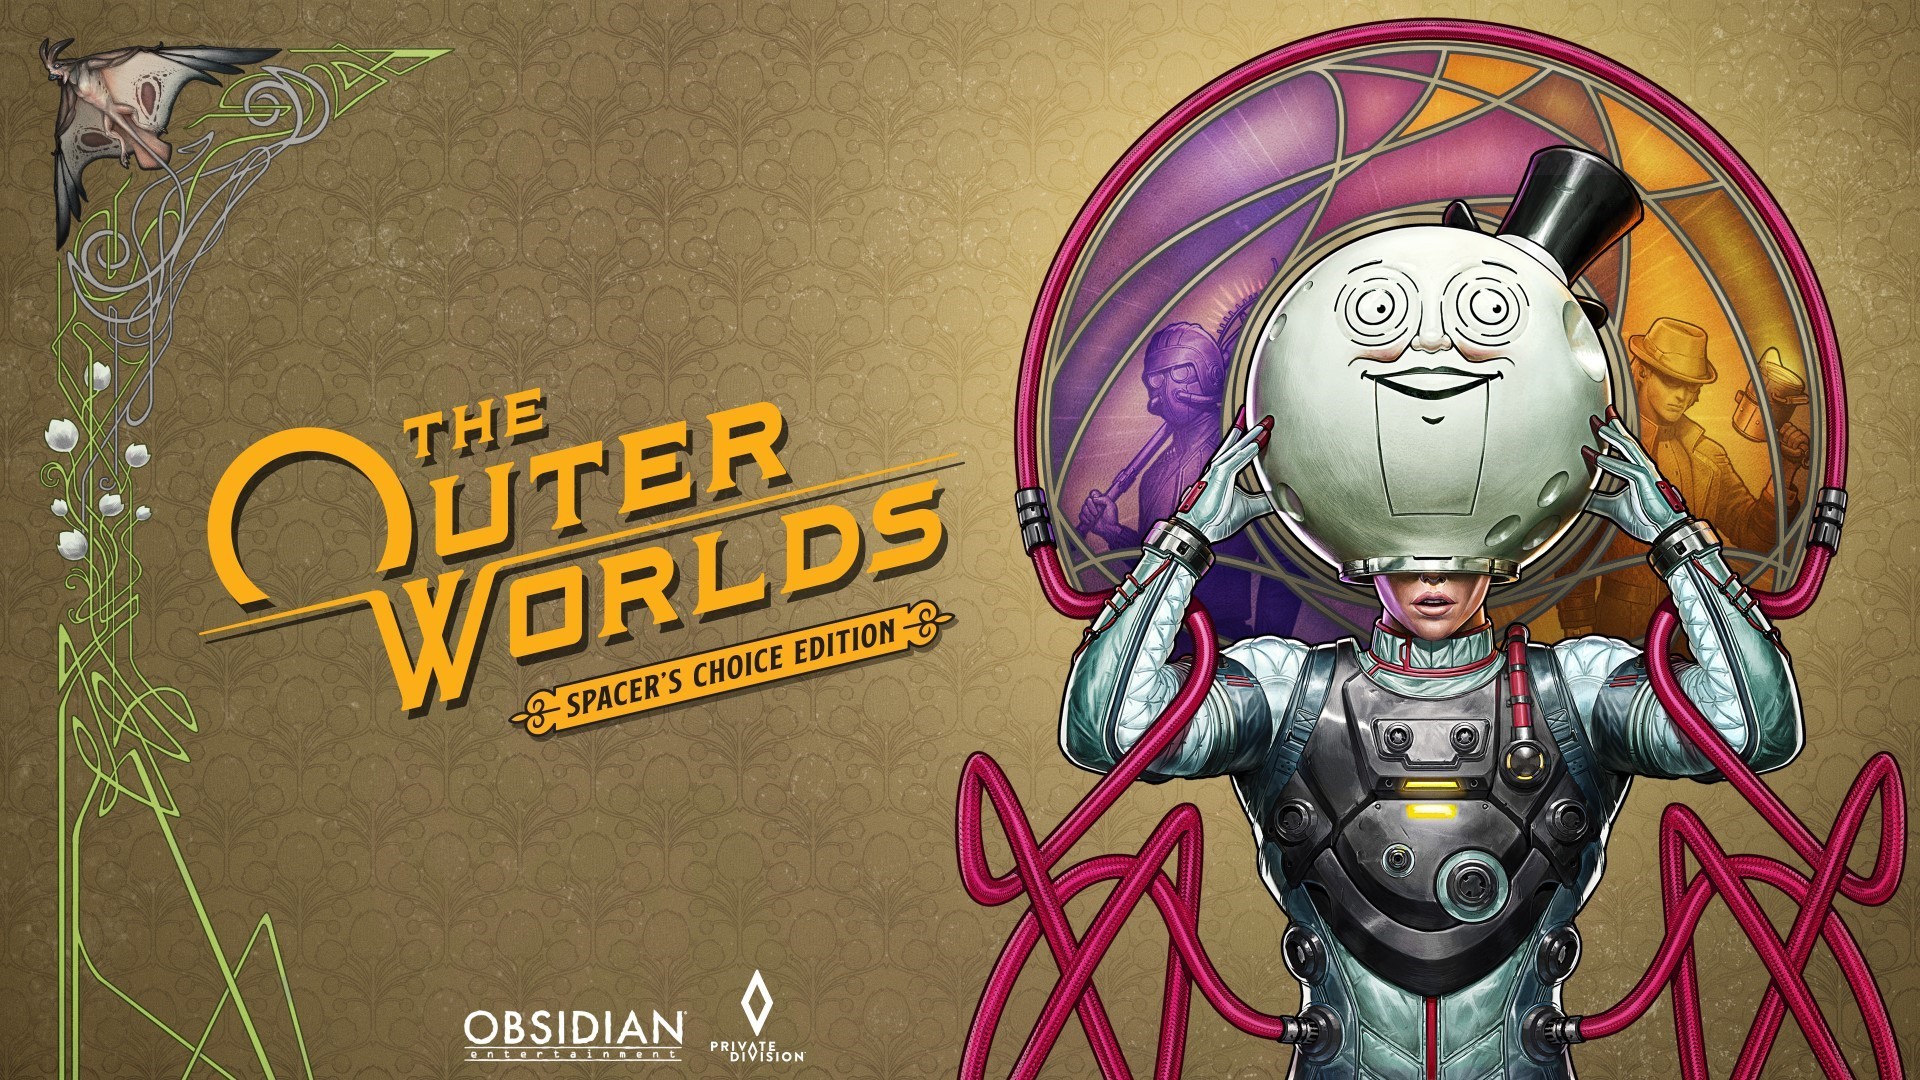 The Outer Worlds: Spacer’s Choice Edition Launches March 7